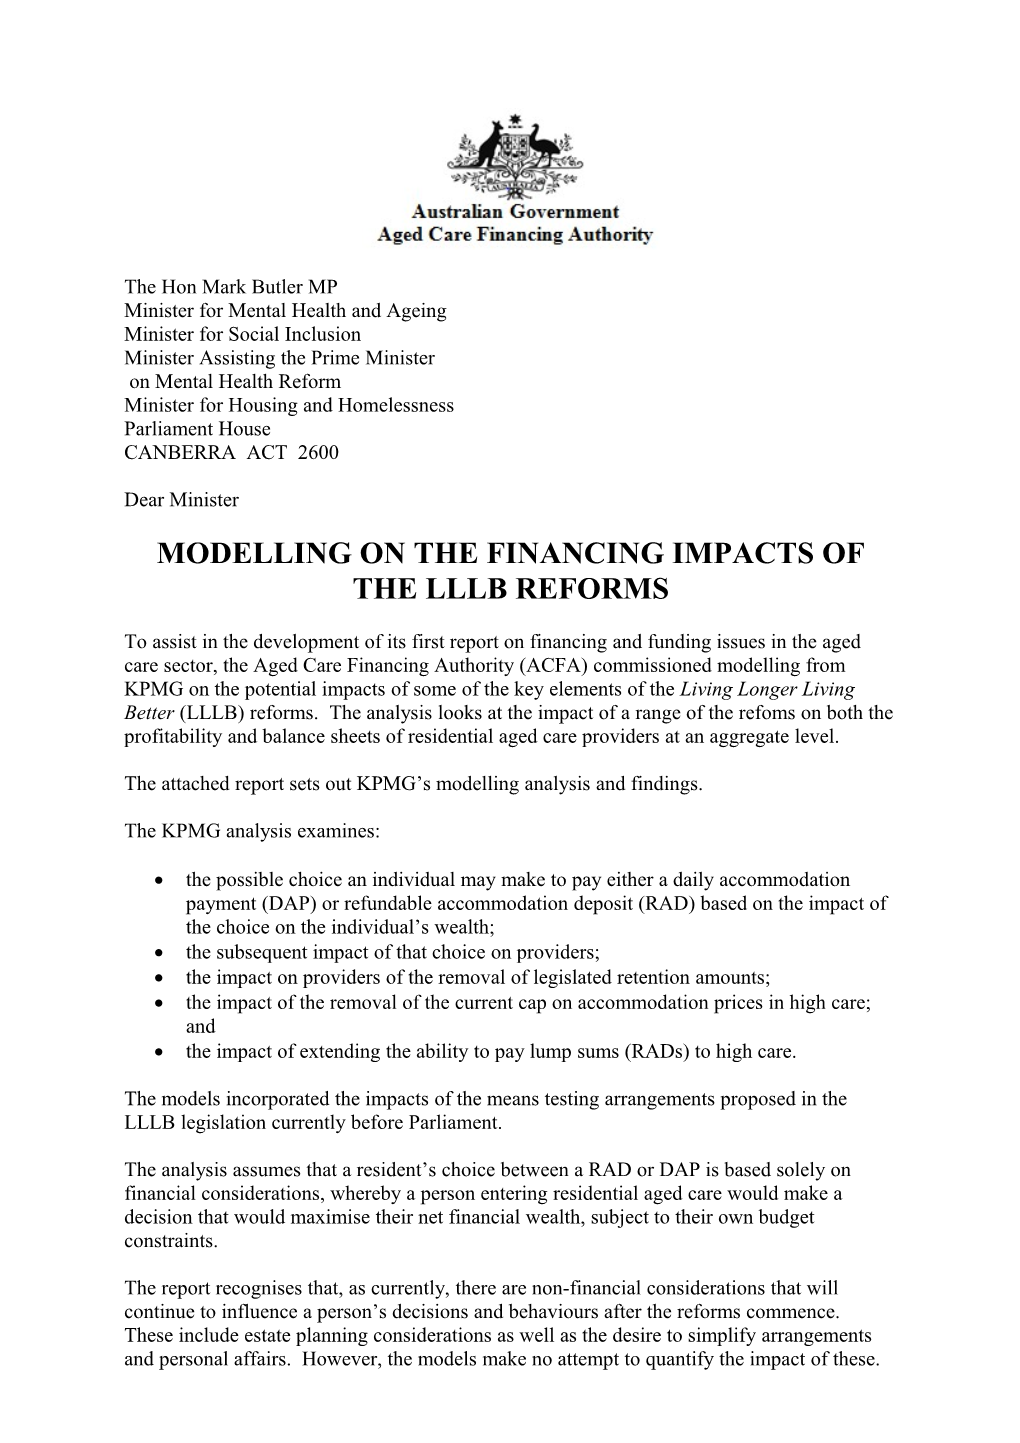 Modelling on the Financing Impacts of the Lllb Reforms